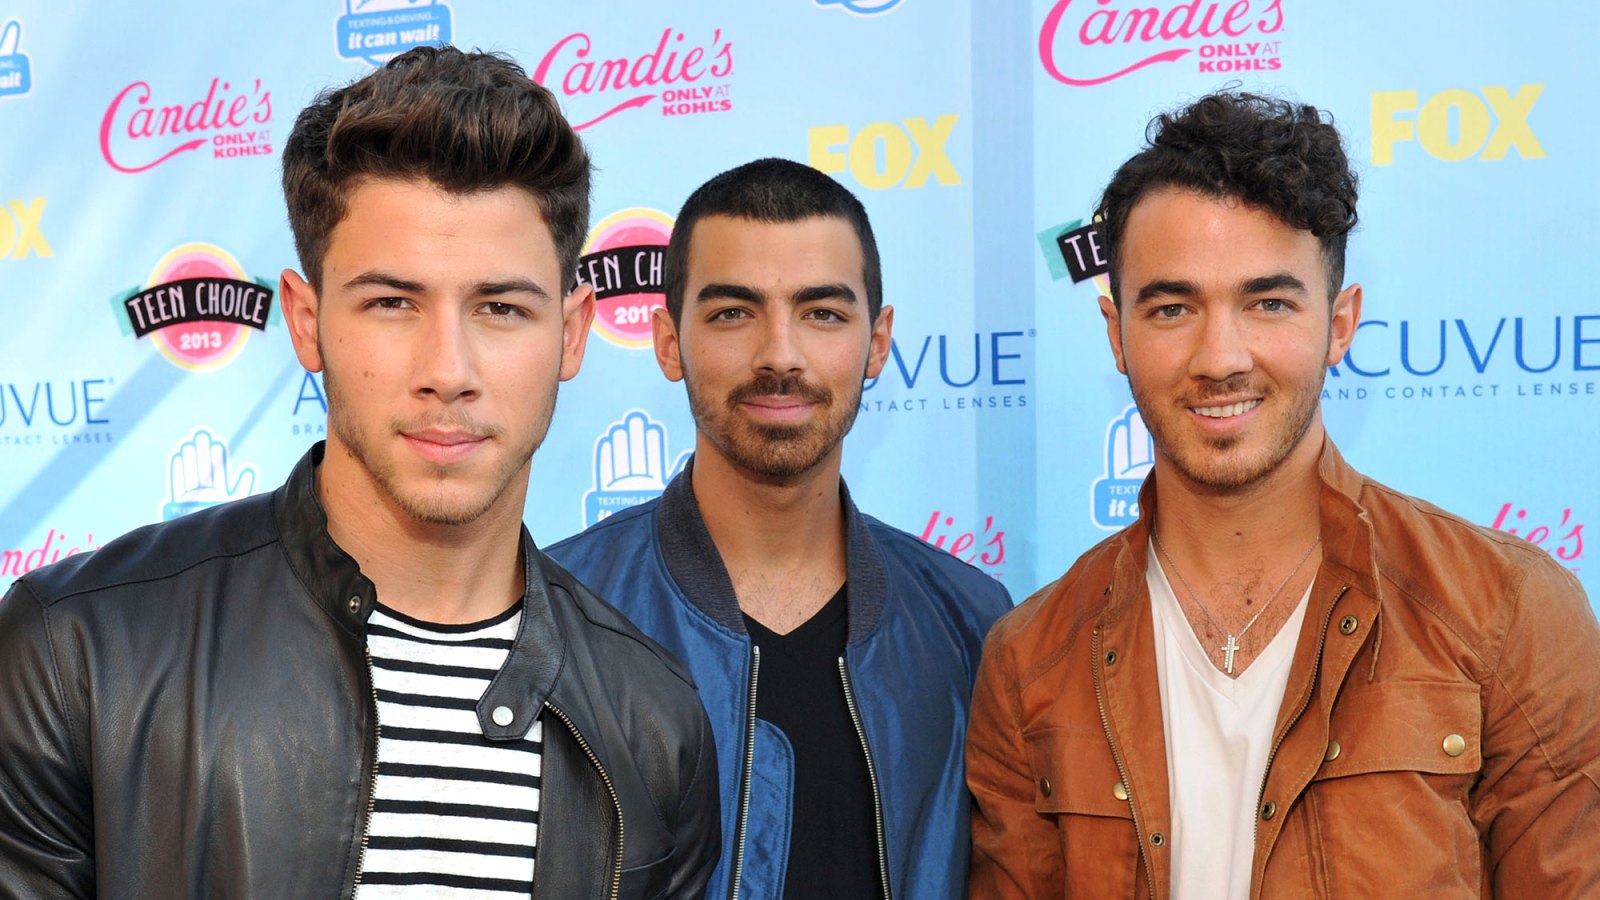 Jonas Brothers Release First Music Video Since Reunion for ‘Sucker’